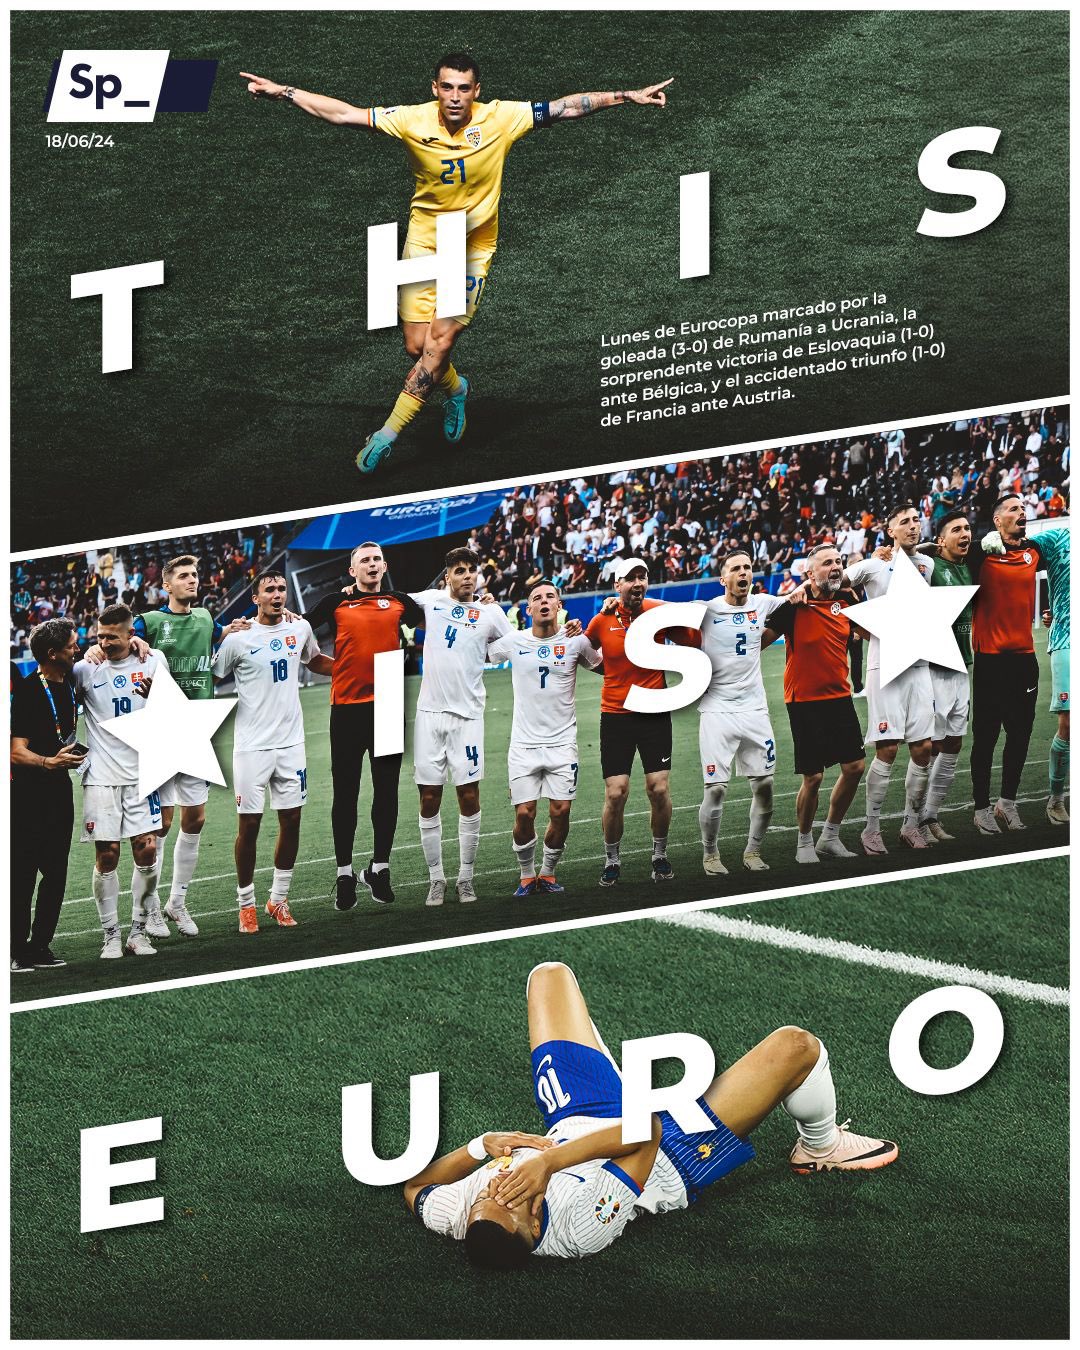 This is EURO